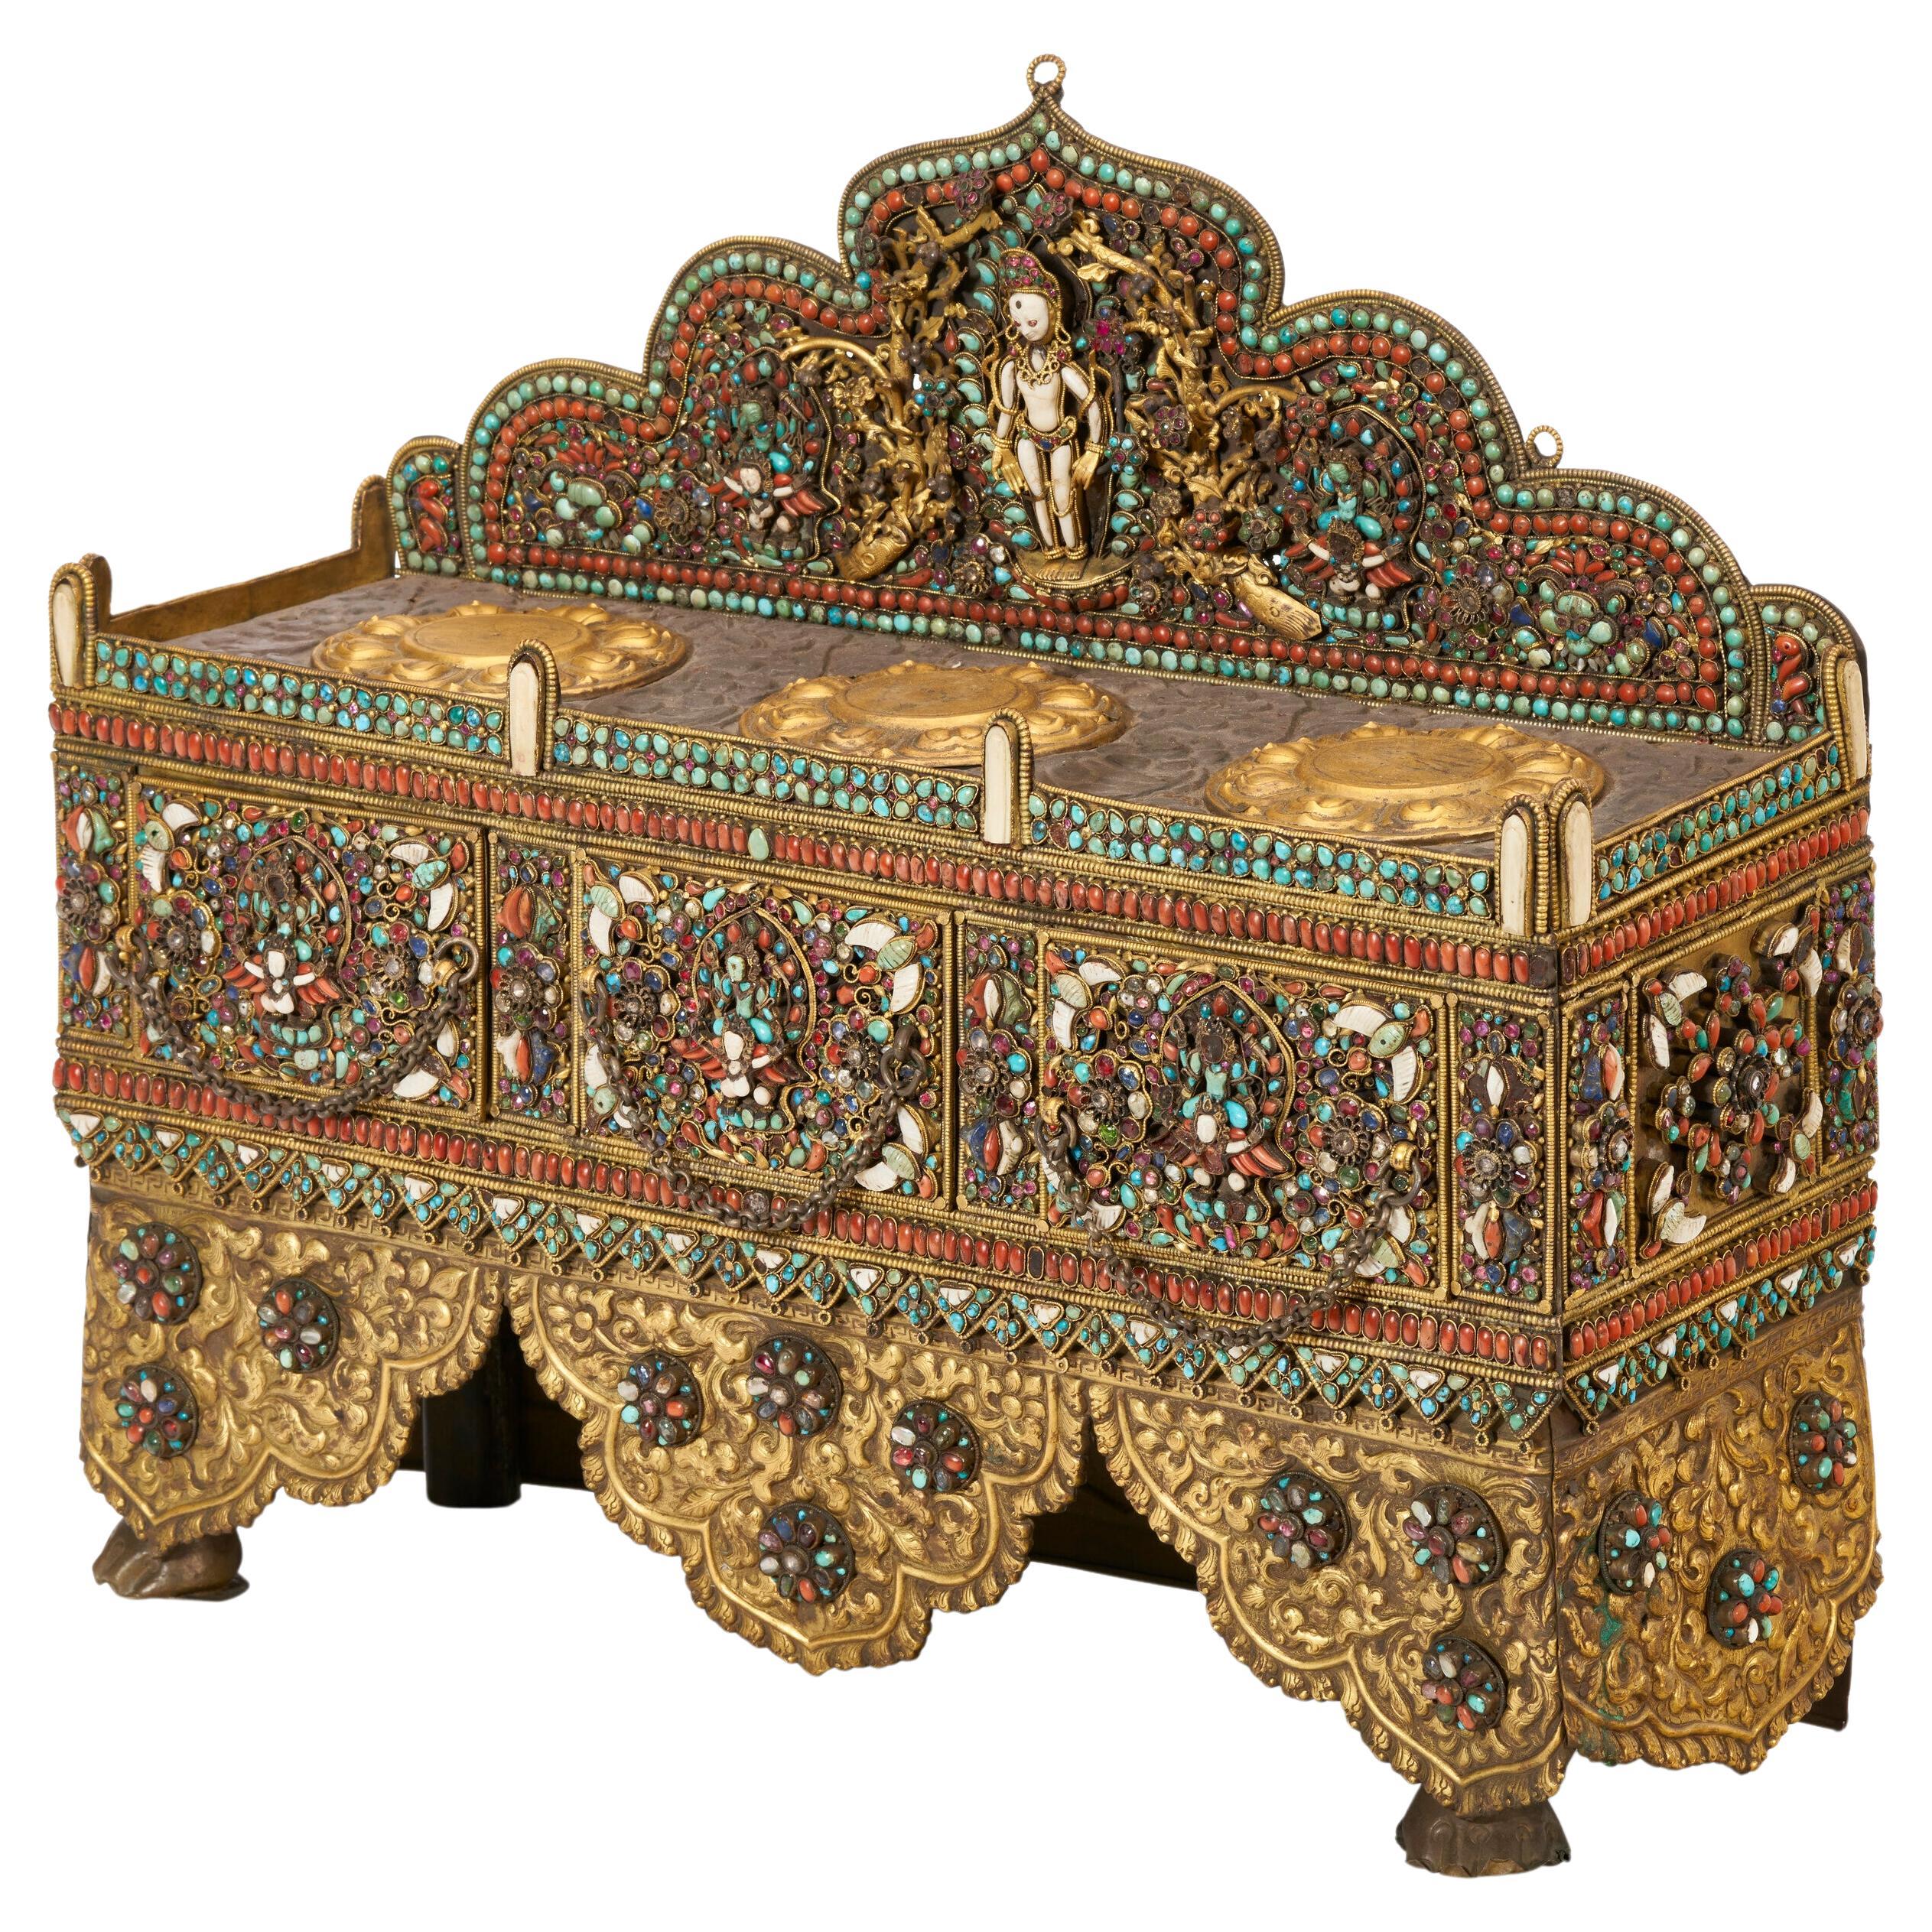 18th/19th Century Nepalese Inlaid and Gilt Silver and Copper Altar